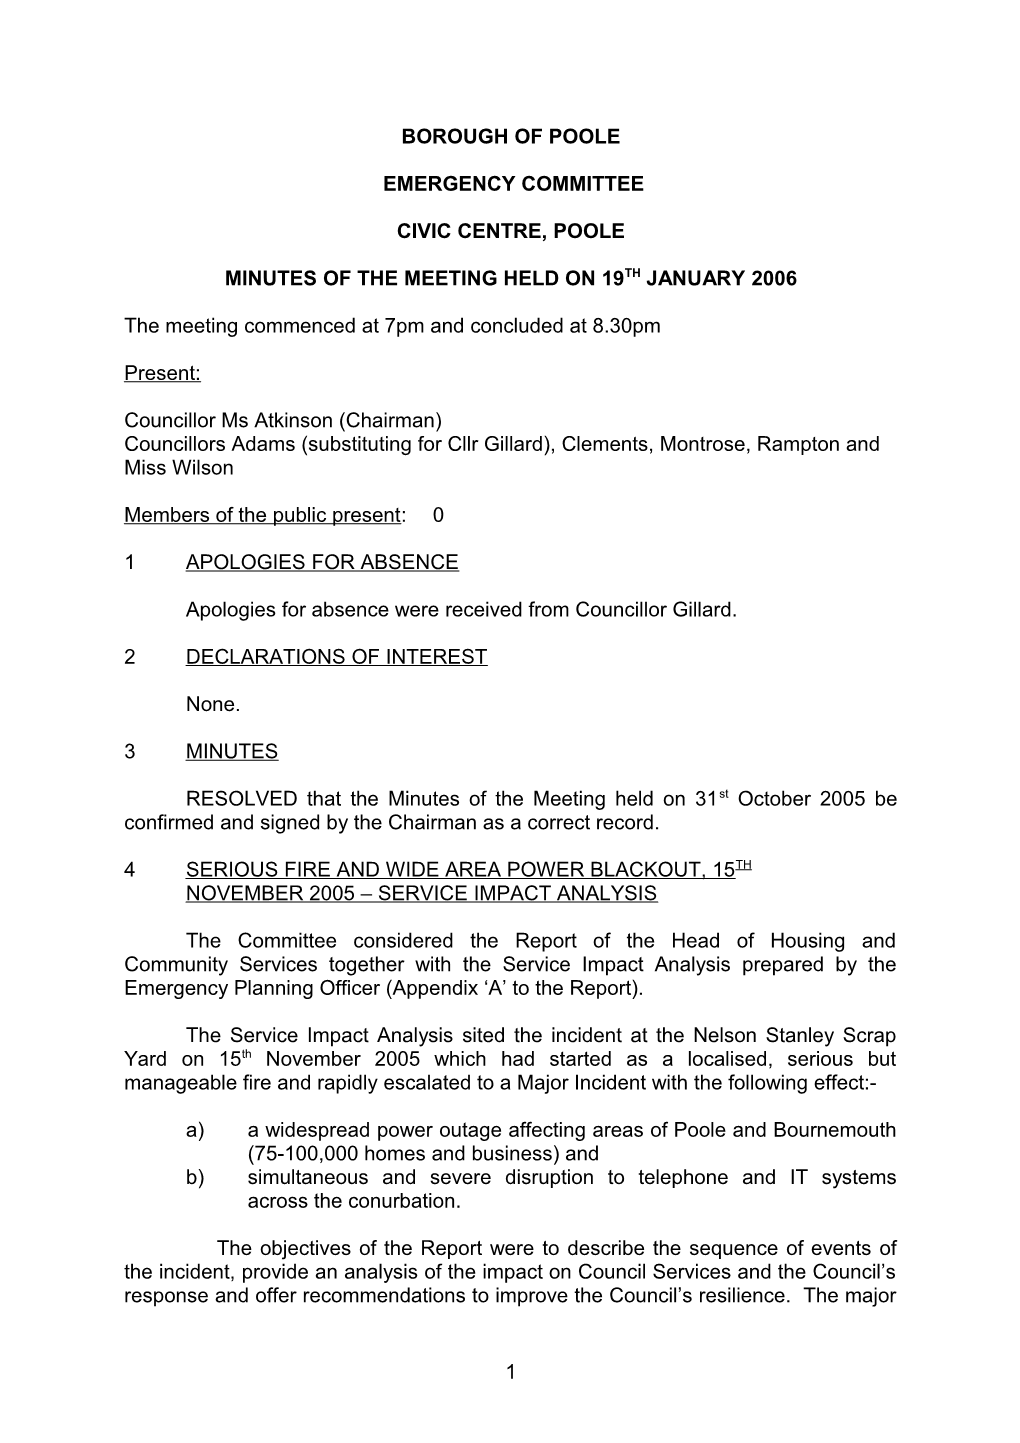 Minutes - Emergency Committee - 19 January 2006